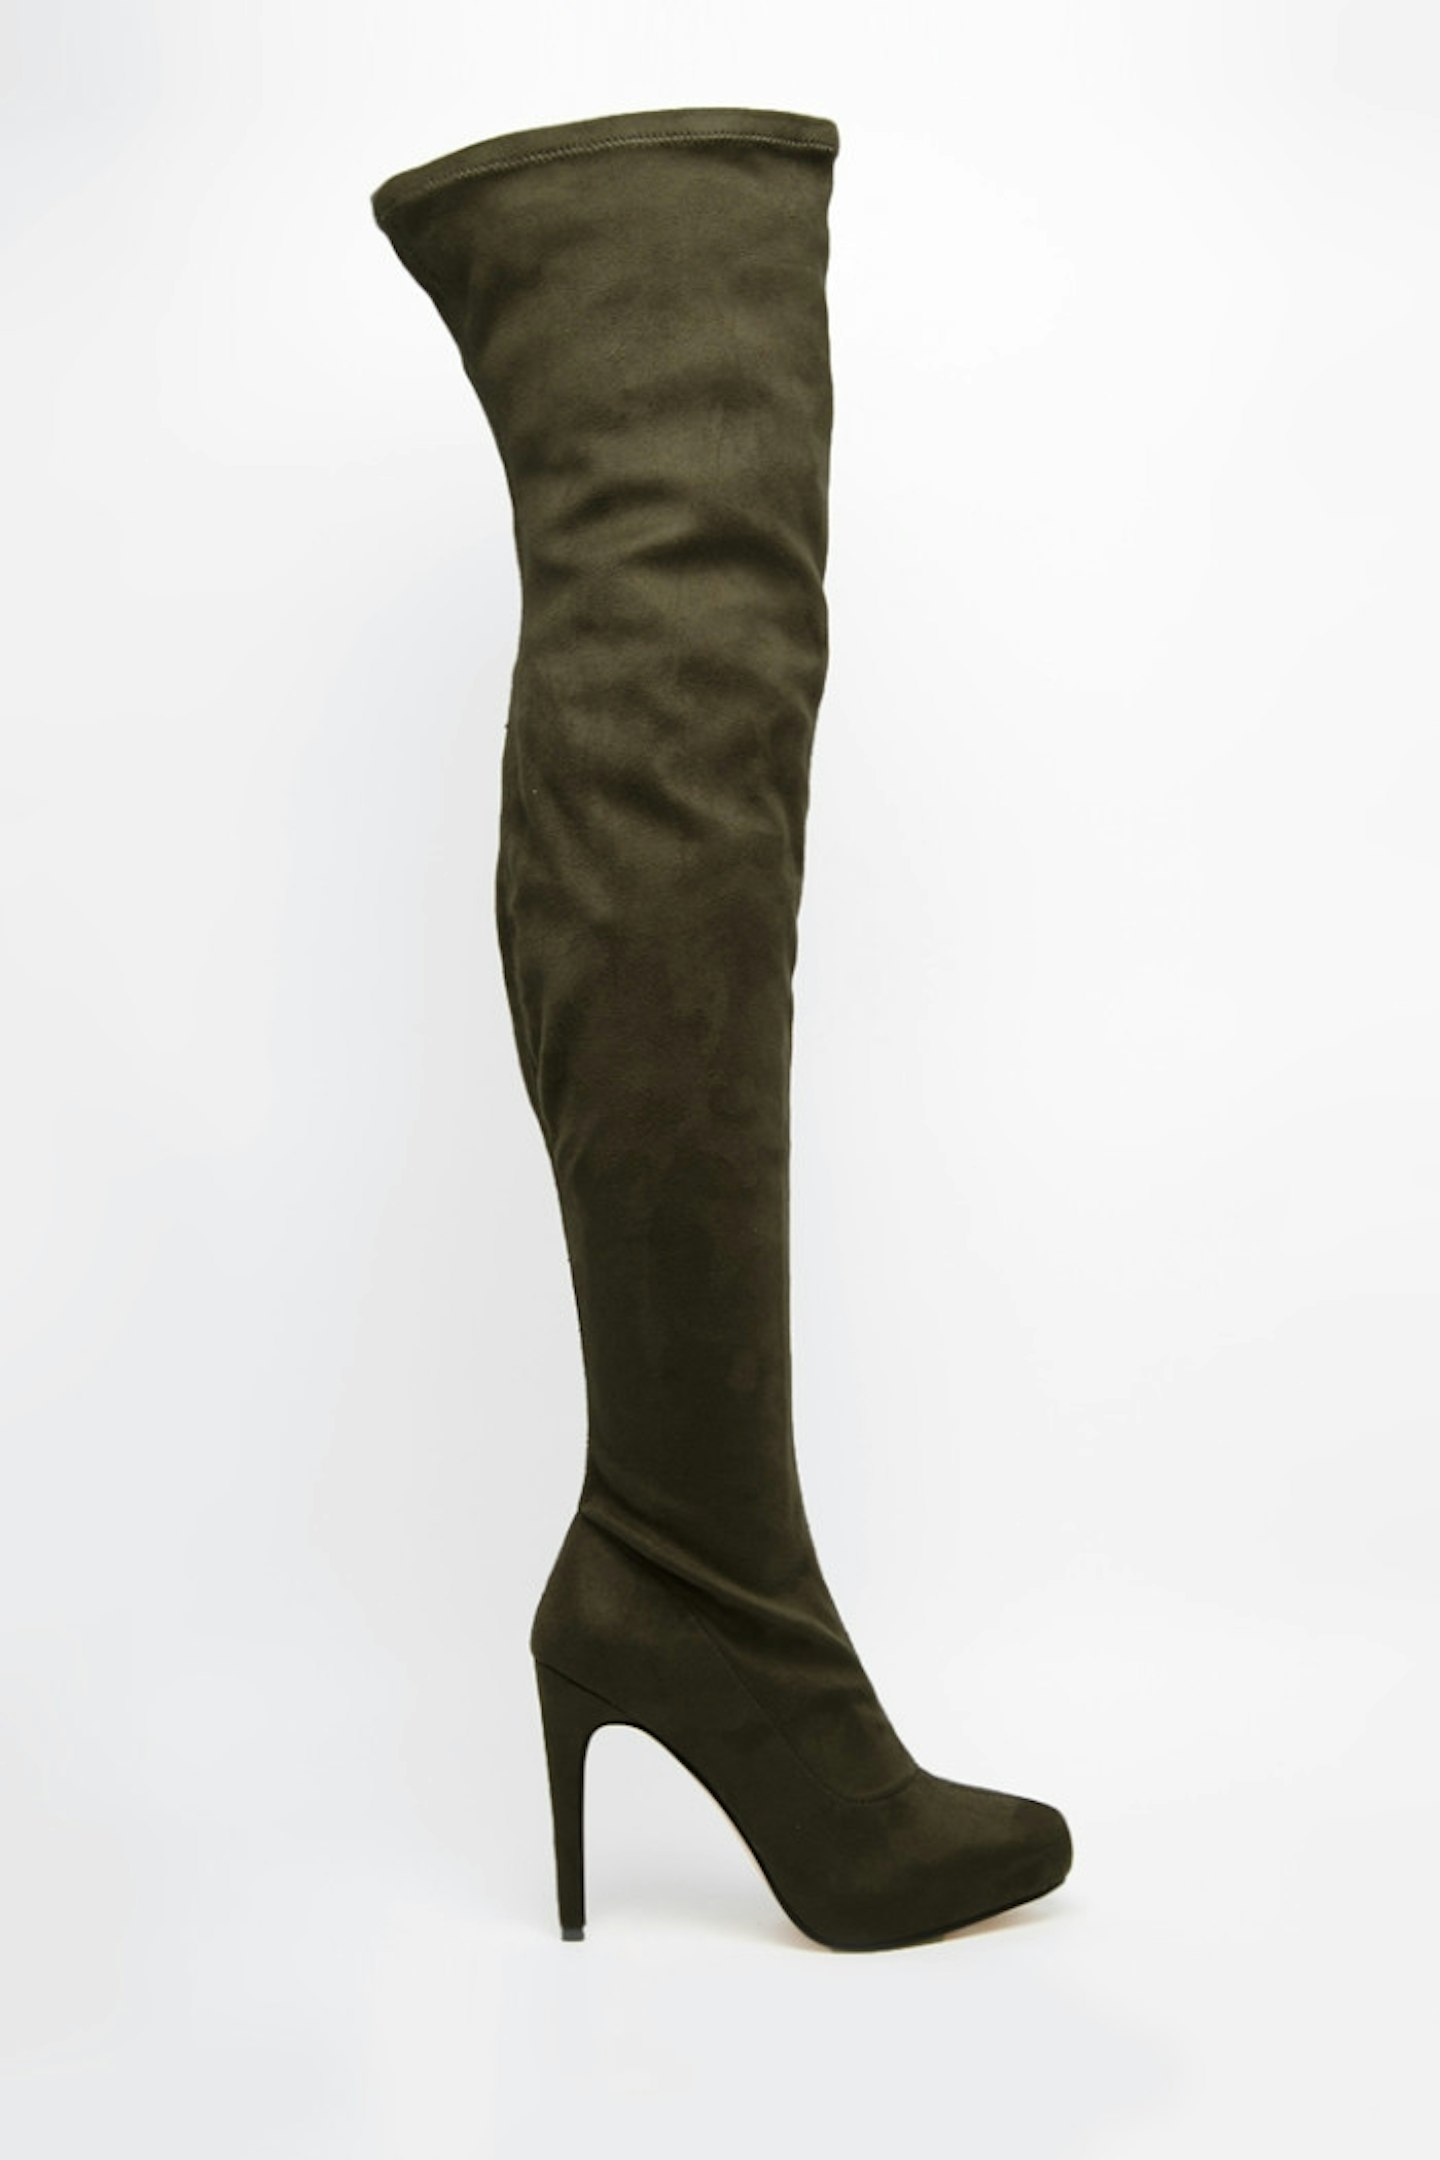 We love these olive green ASOS boots. Wear with a turtleneck sweater dress and opaques for a great winter look.